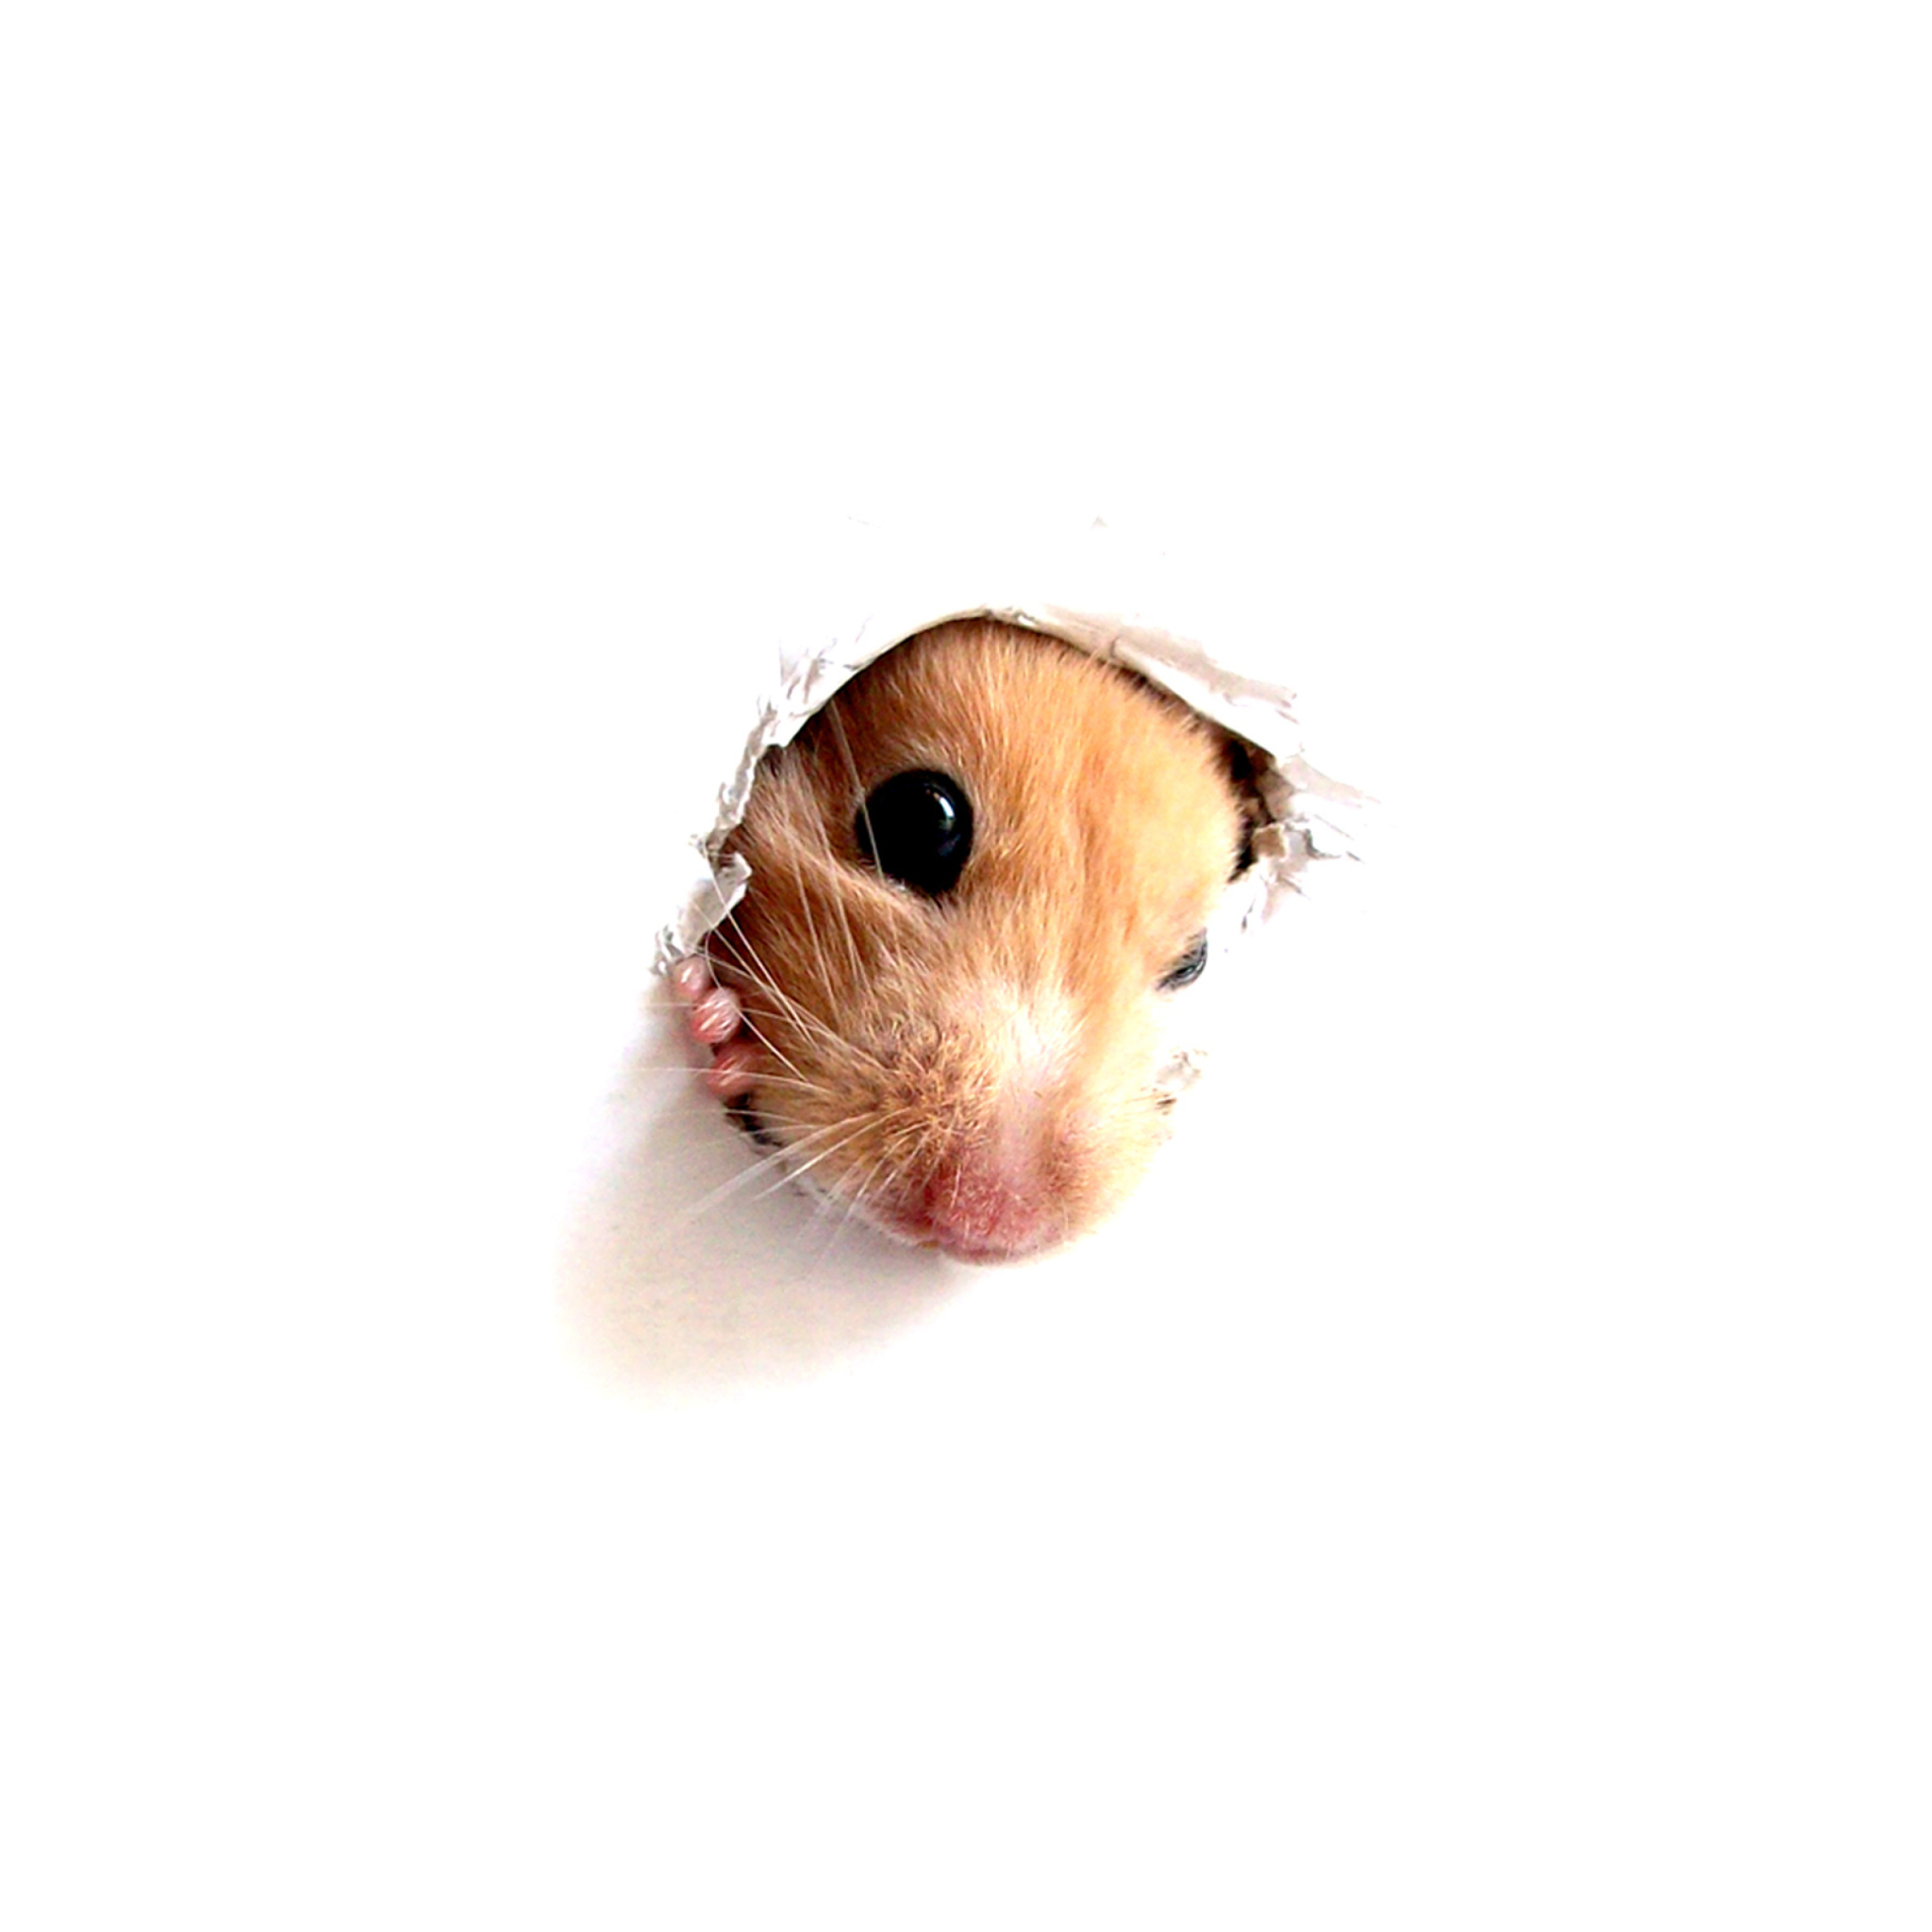 Hamster In Hole On Your Screen wallpaper 2048x2048